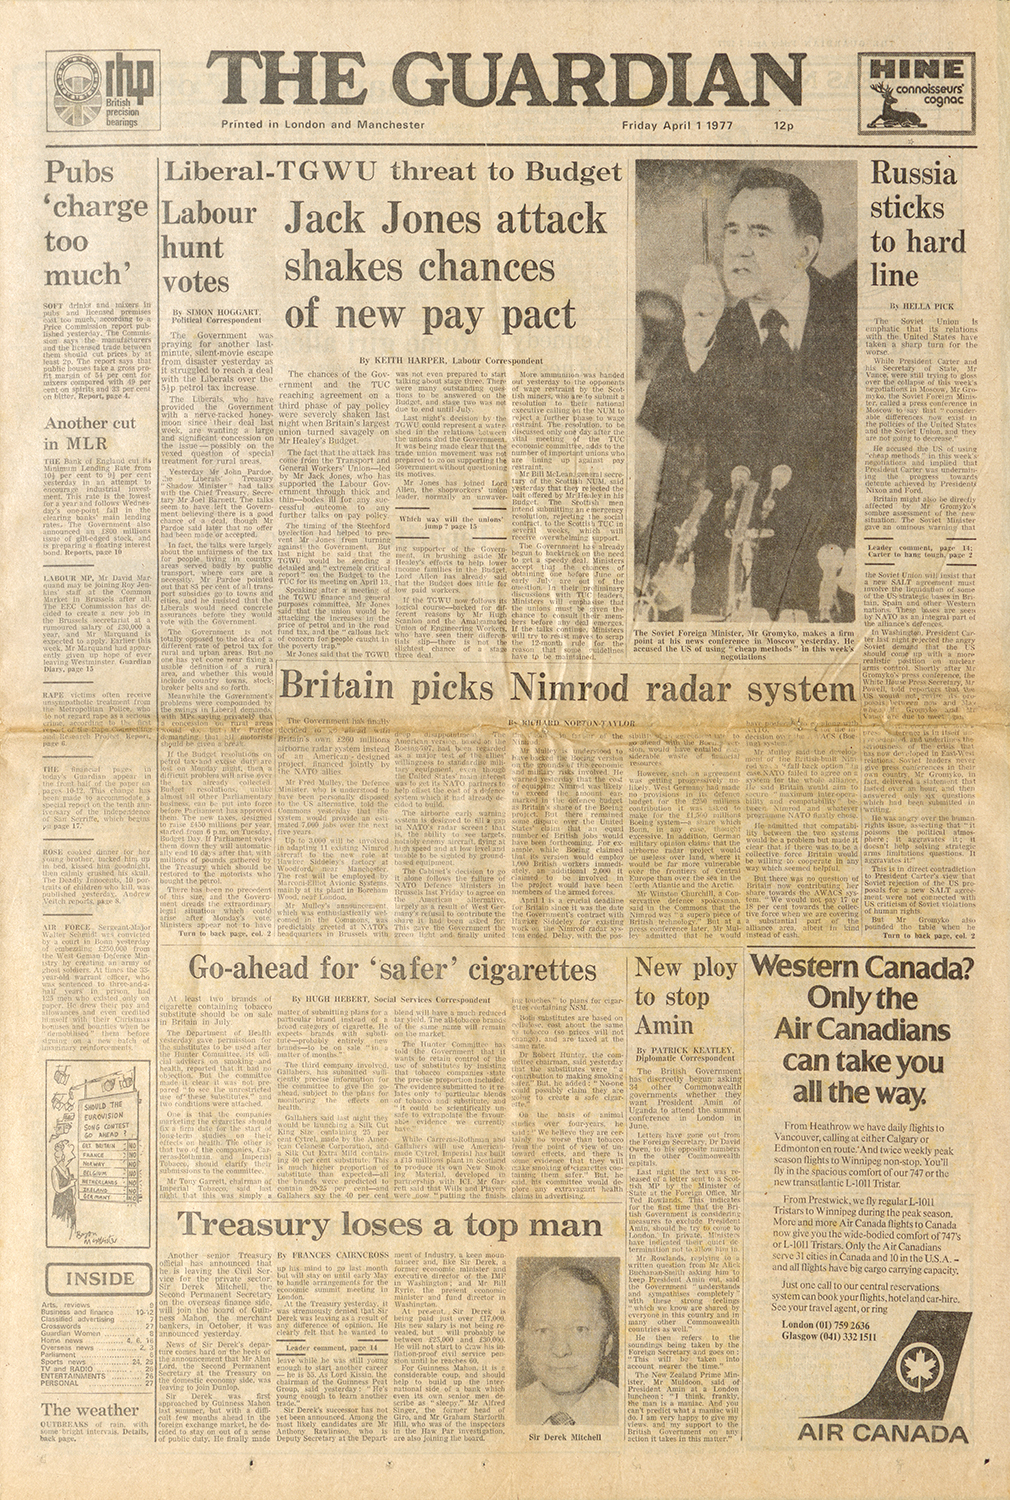 The Guardian Front Page April 1, 1977